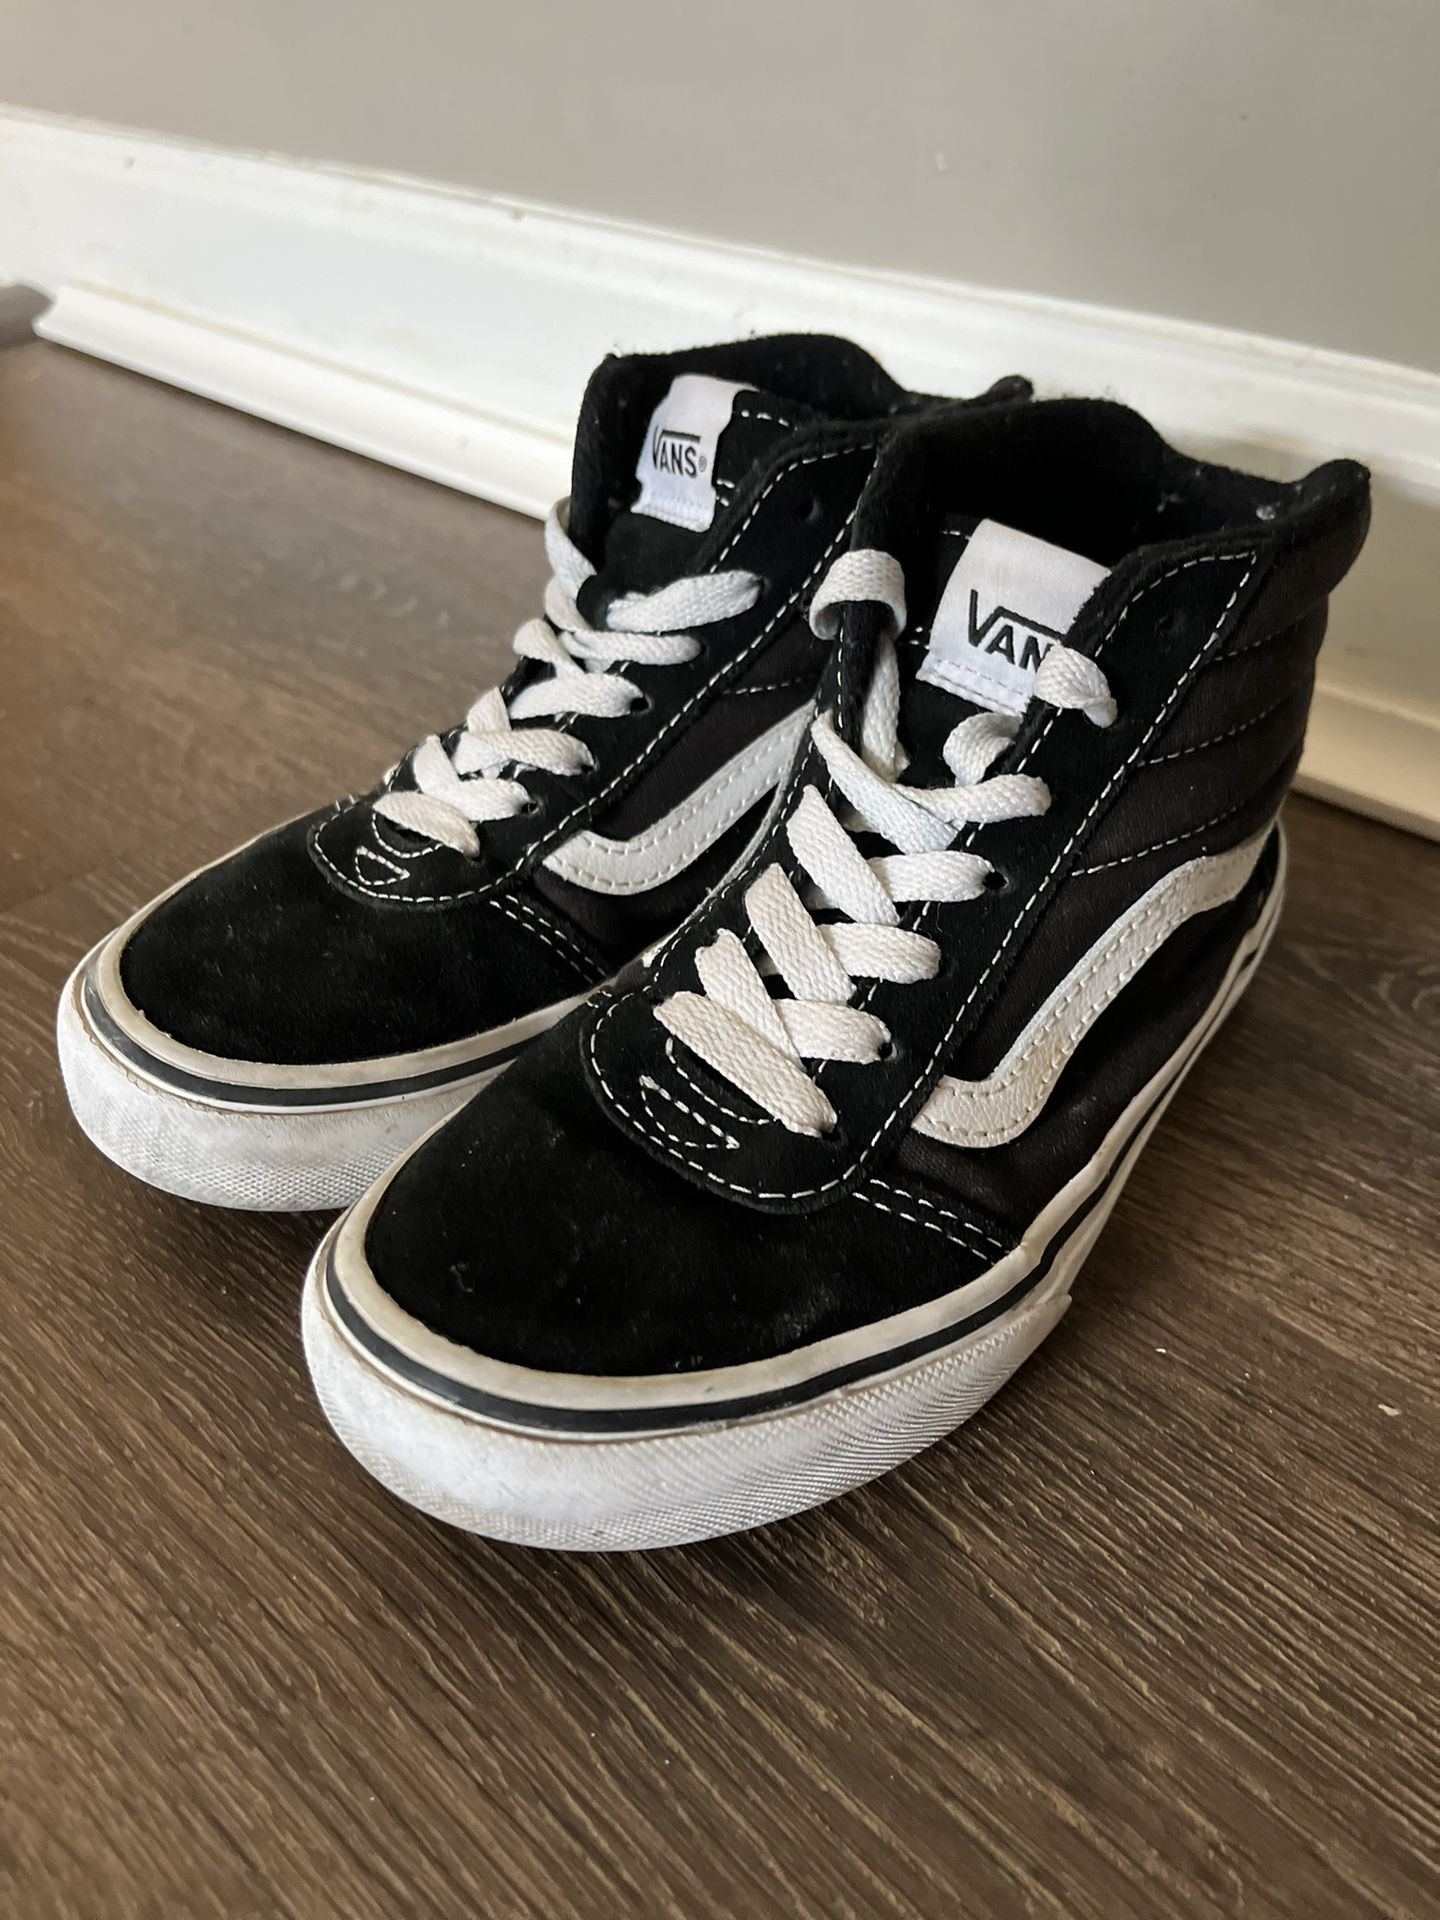 Vans kids (youth) Size 1.5